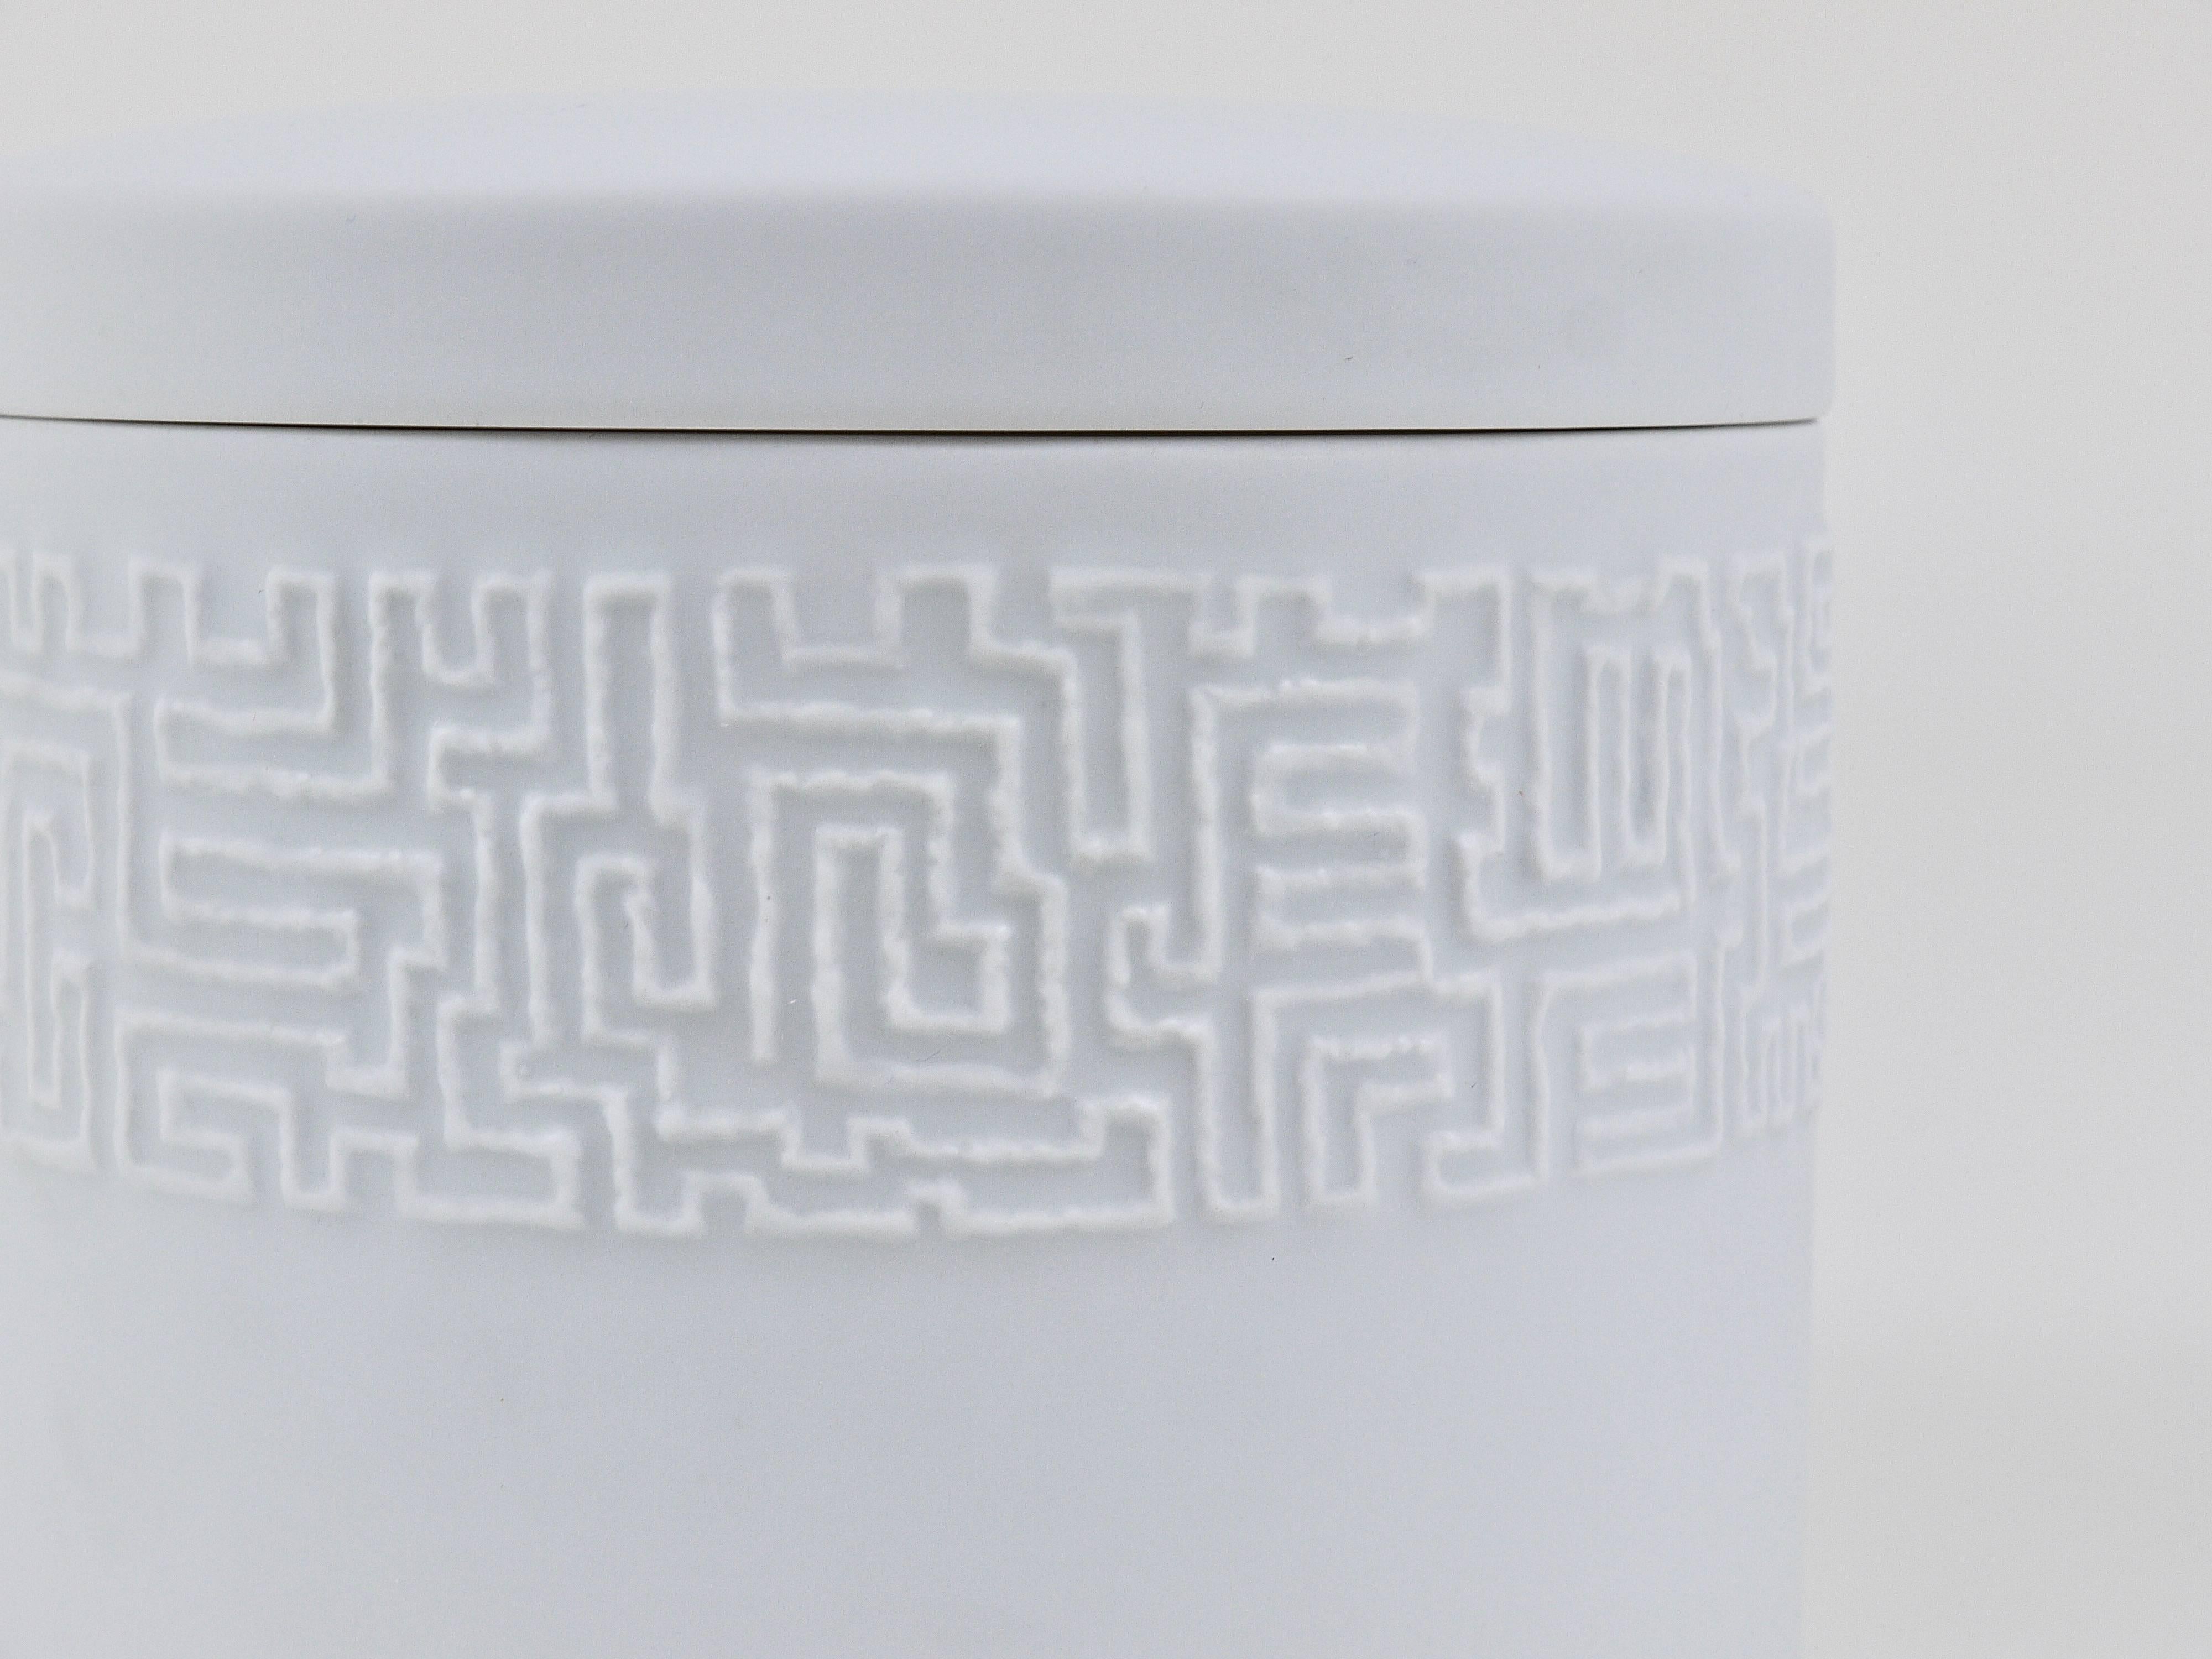 White Relief Op Art Bowl with Lid, Cuno Fischer, Rosenthal Studio-Linie, 1960s For Sale 1